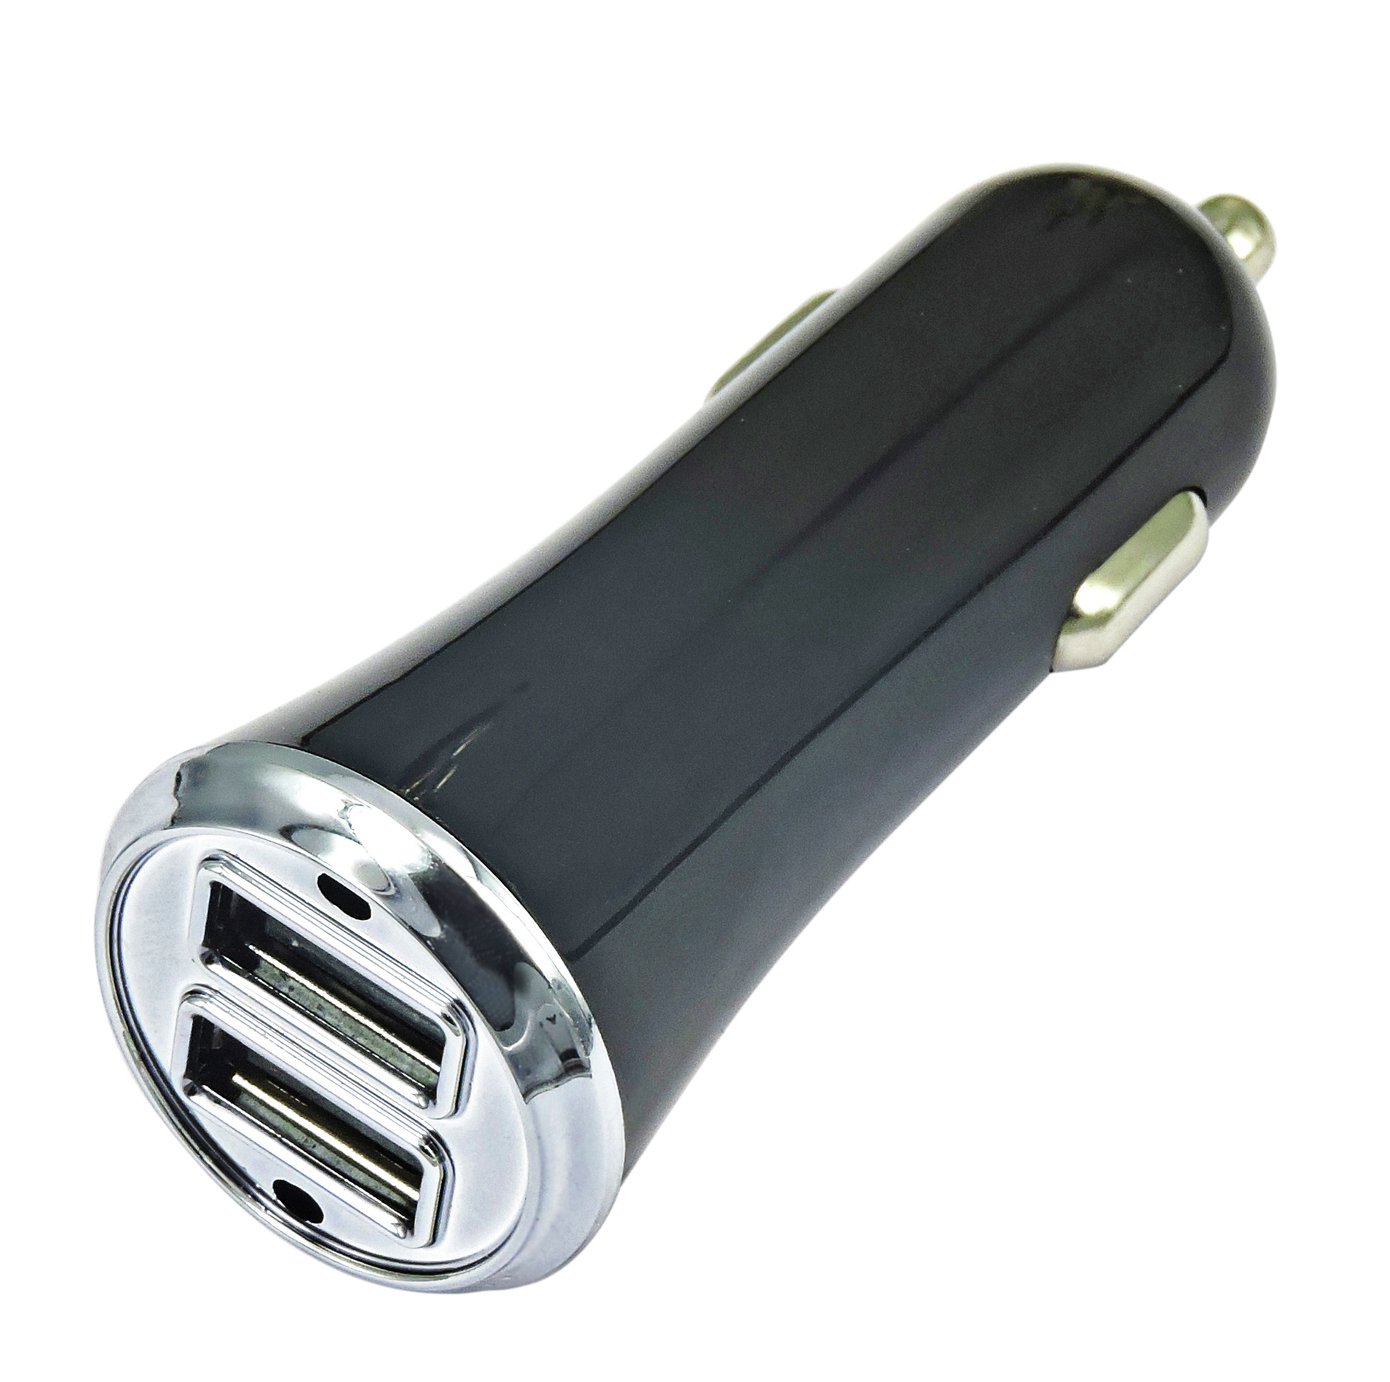 12-24W Dual USB Port Car Charger Review